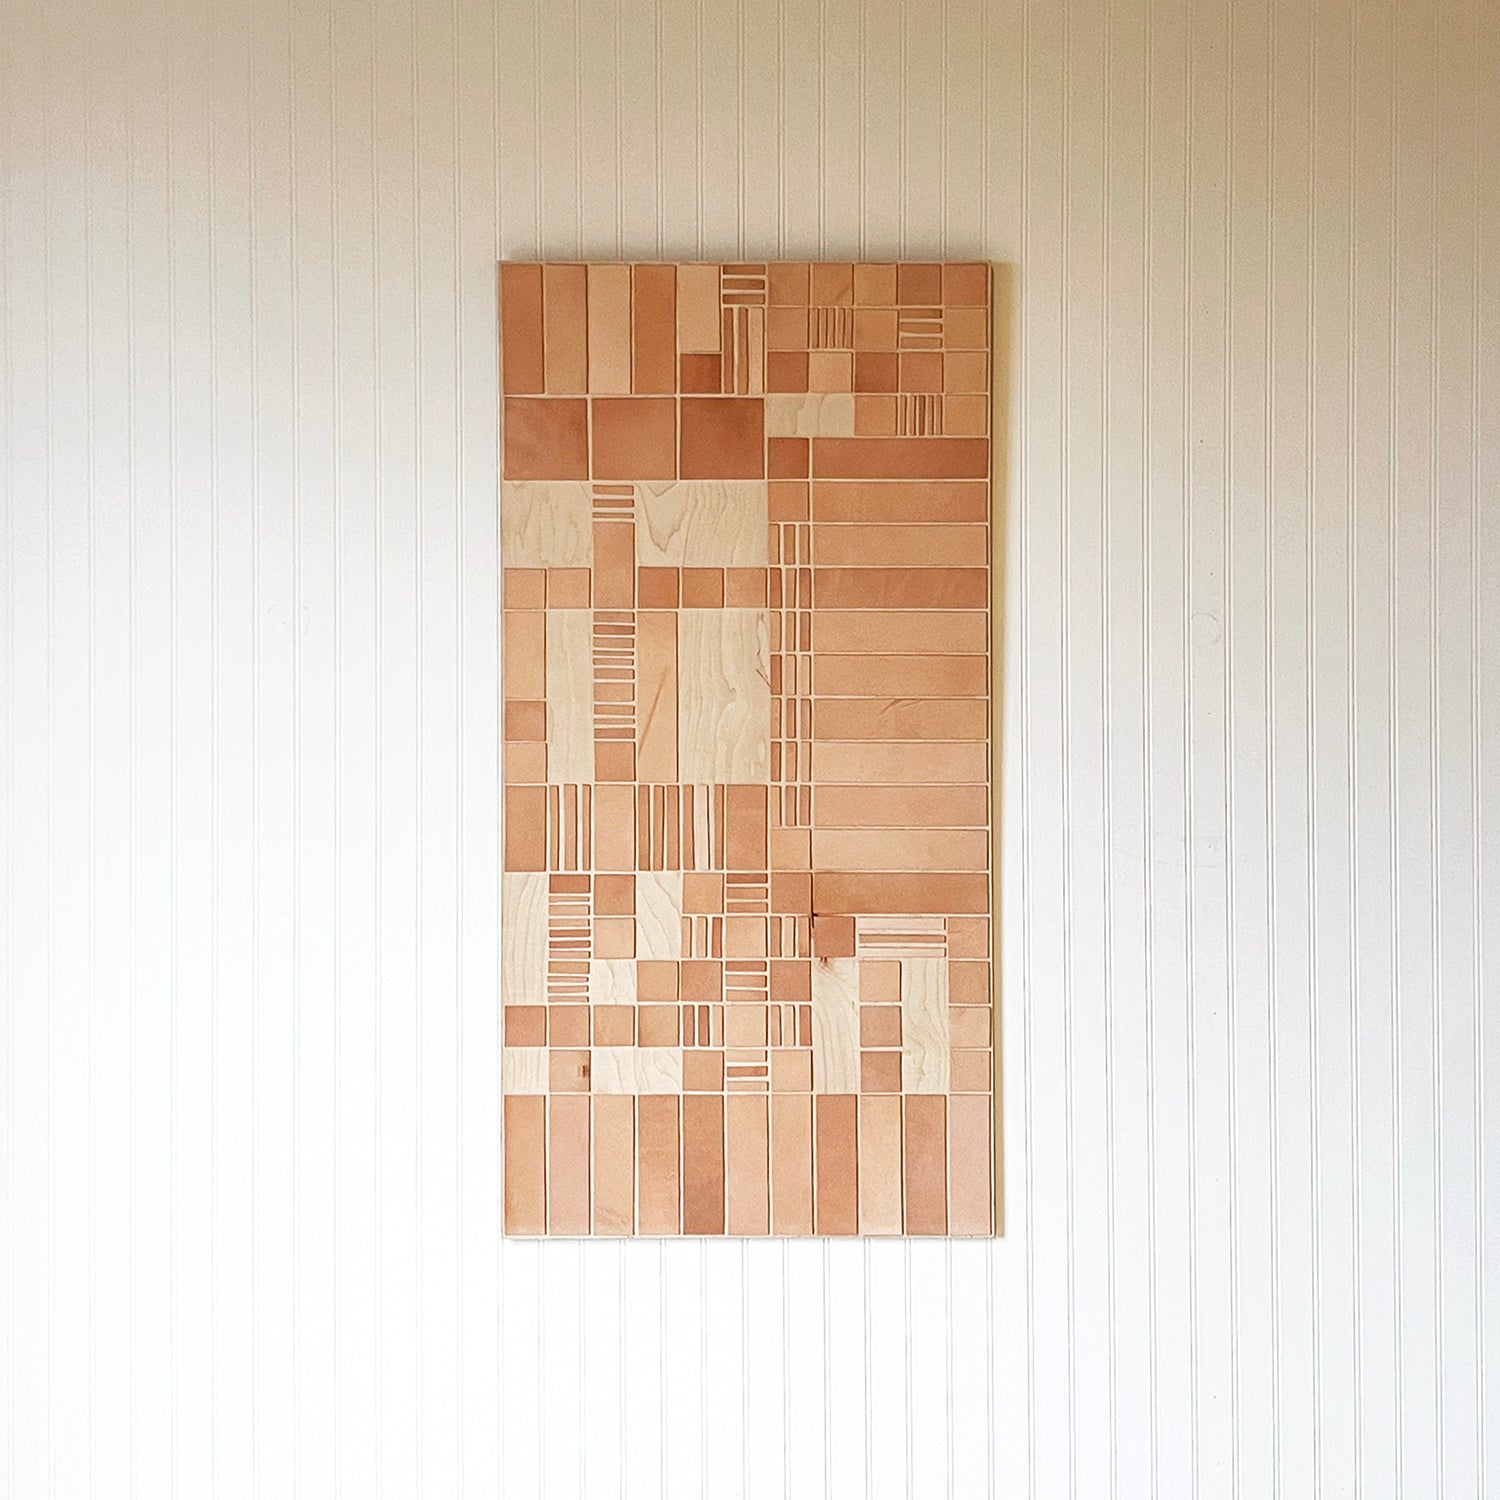 The Passage of Time II - Leather & Wood - 24" x 48"